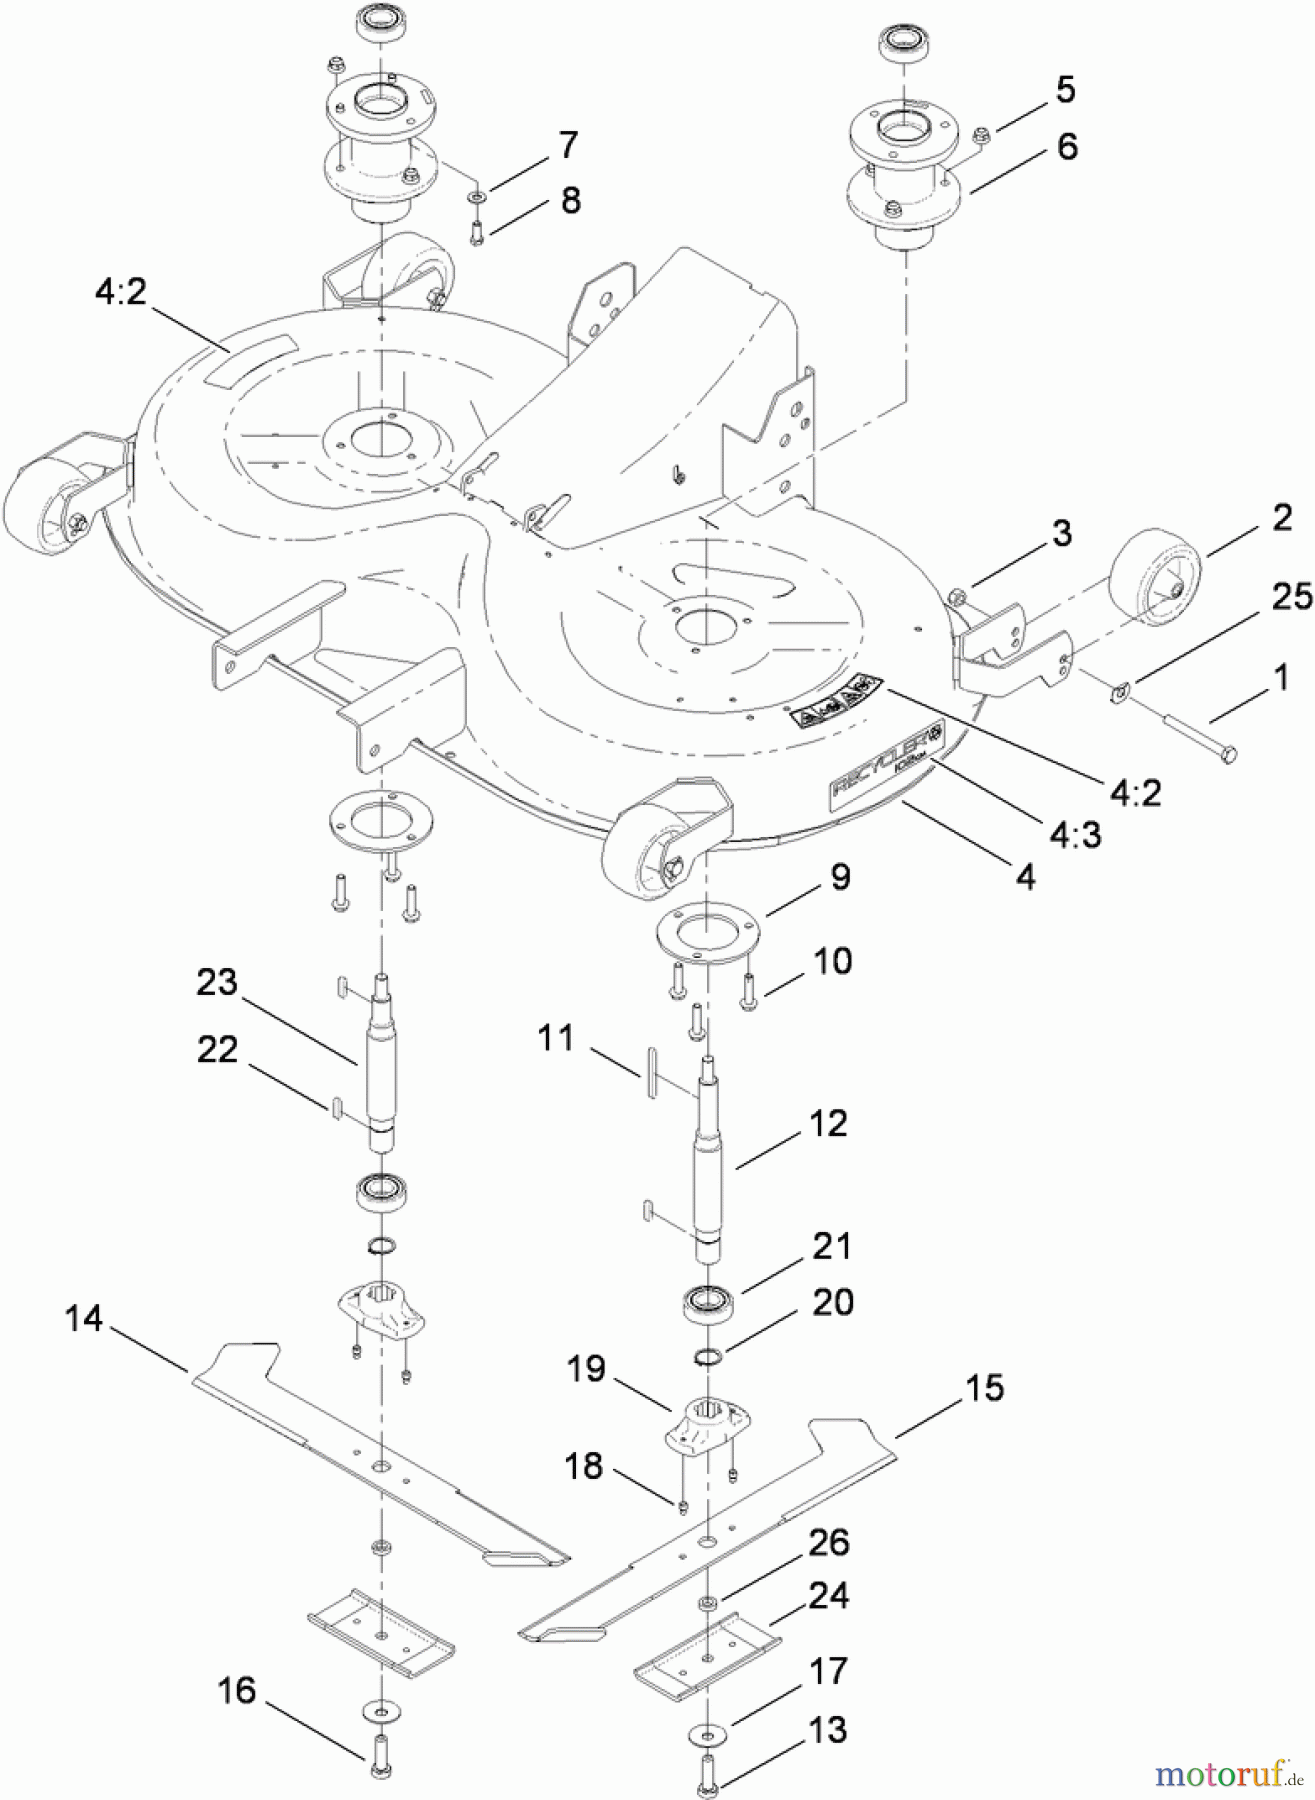  Toro Neu Mowers, Lawn & Garden Tractor Seite 1 74593 (DH 220) - Toro DH 220 Lawn Tractor, 2010 (310000001-310999999) CUTTING PAN AND MOWER HOUSING ASSEMBLY